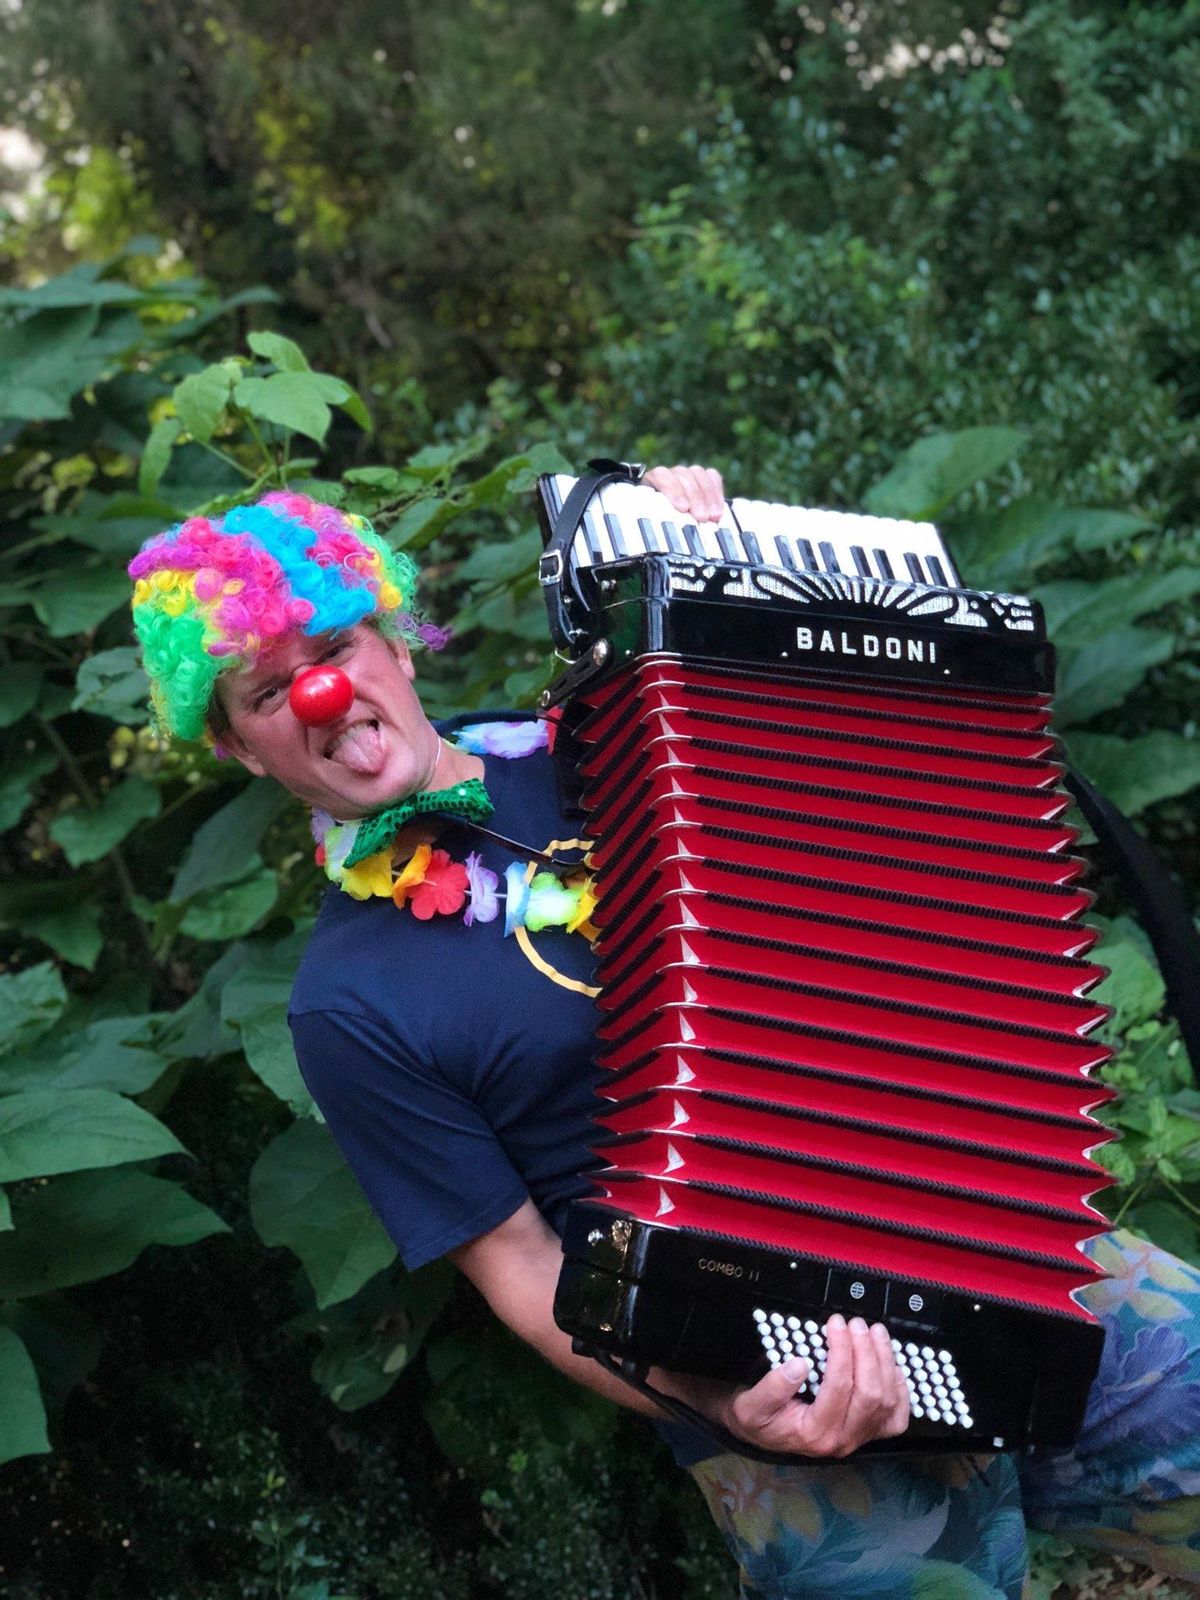 Justin Beights, of Charlottesville, Virginia, says he’s assembling a small army of accordion-playing clowns to fight hate in North Idaho. (Courtesy of Justin Beights)